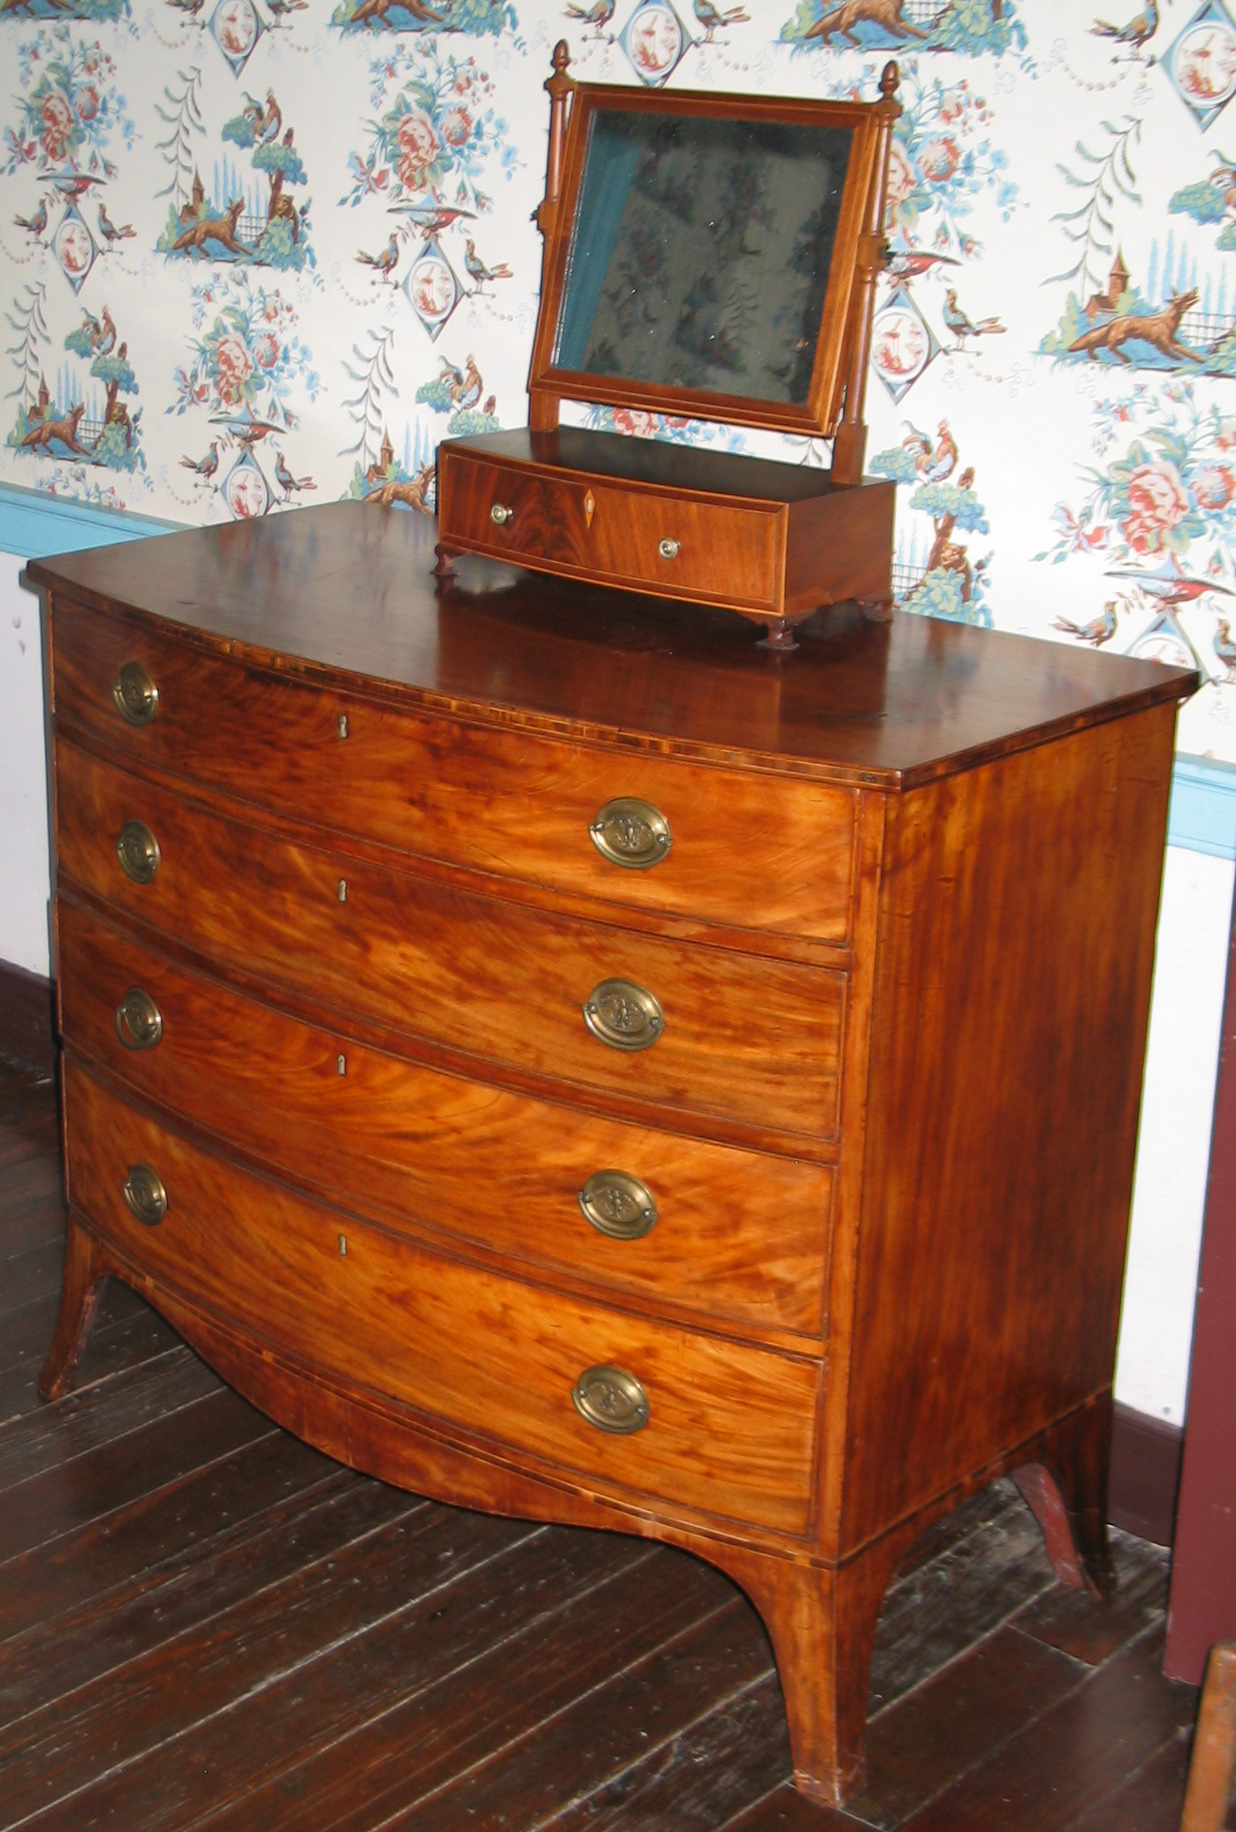 Spring Cleaning Basic Care And Maintenance For Antique Furniture